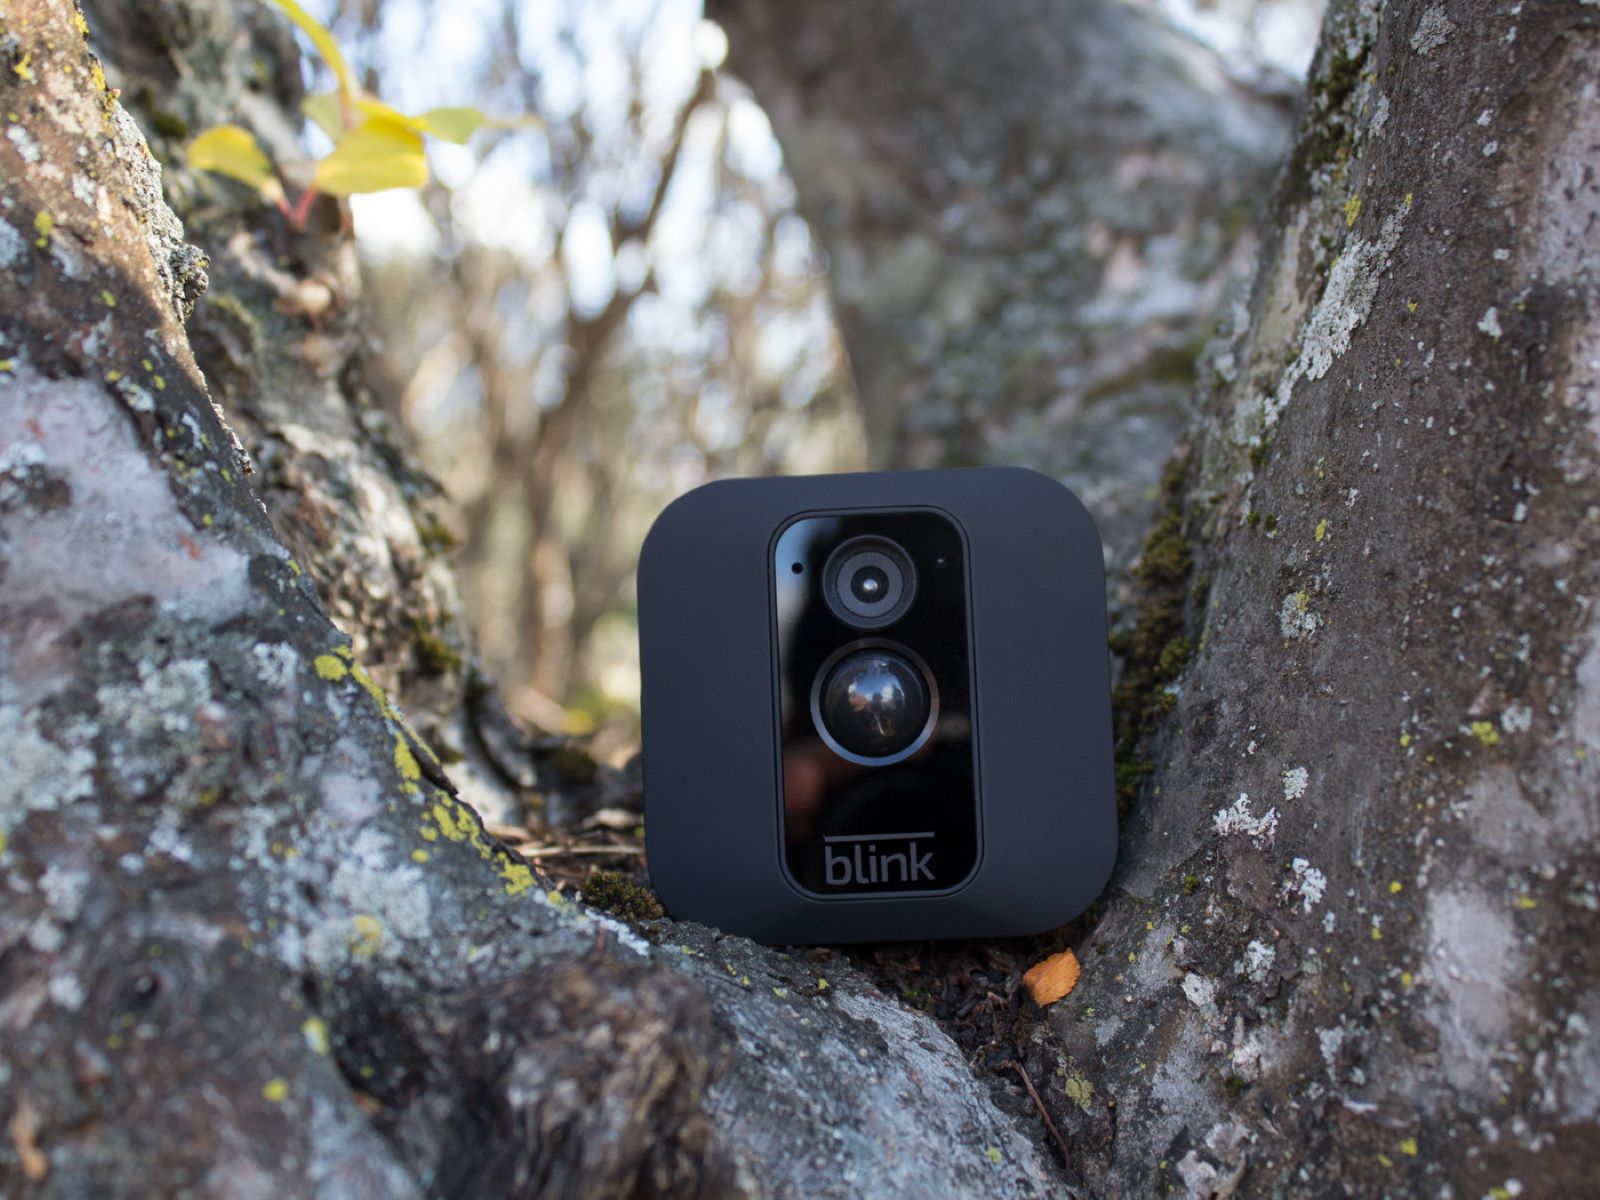 How To Charge A Blink Outdoor Camera